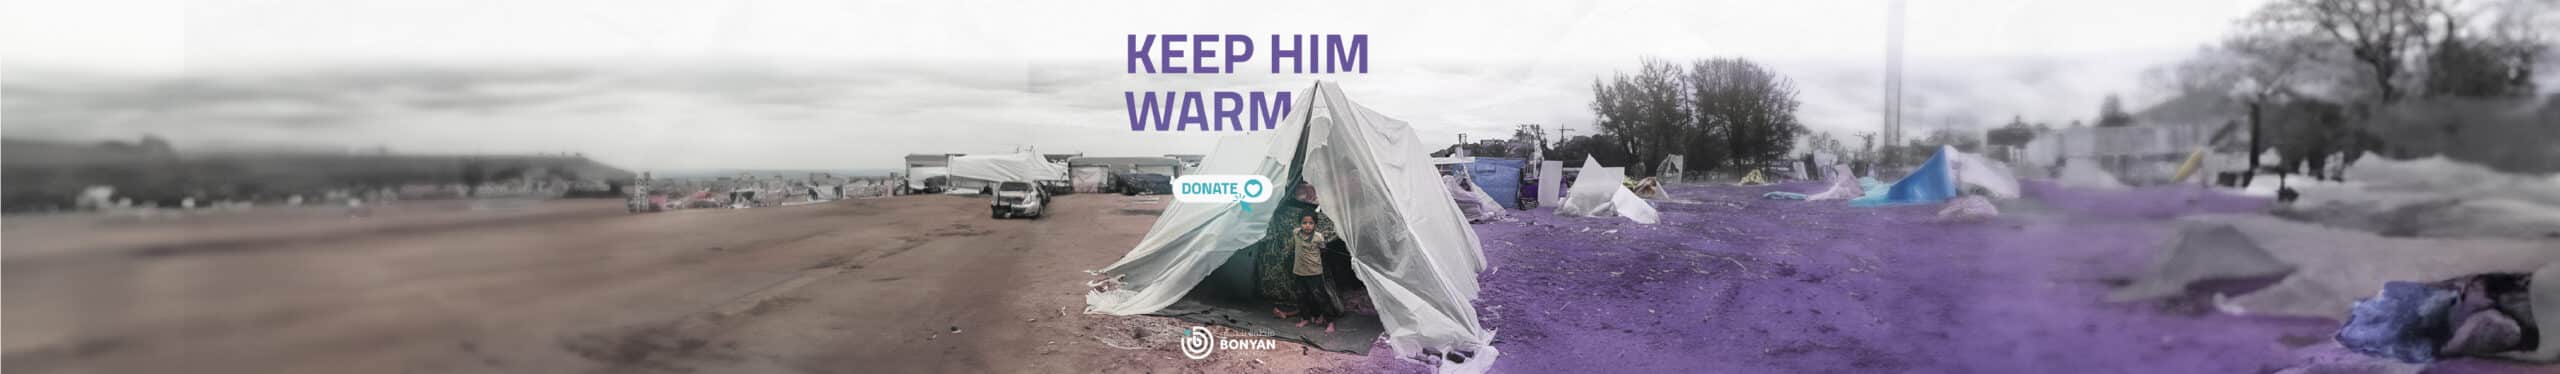 How to Help Palestinian People This Winter